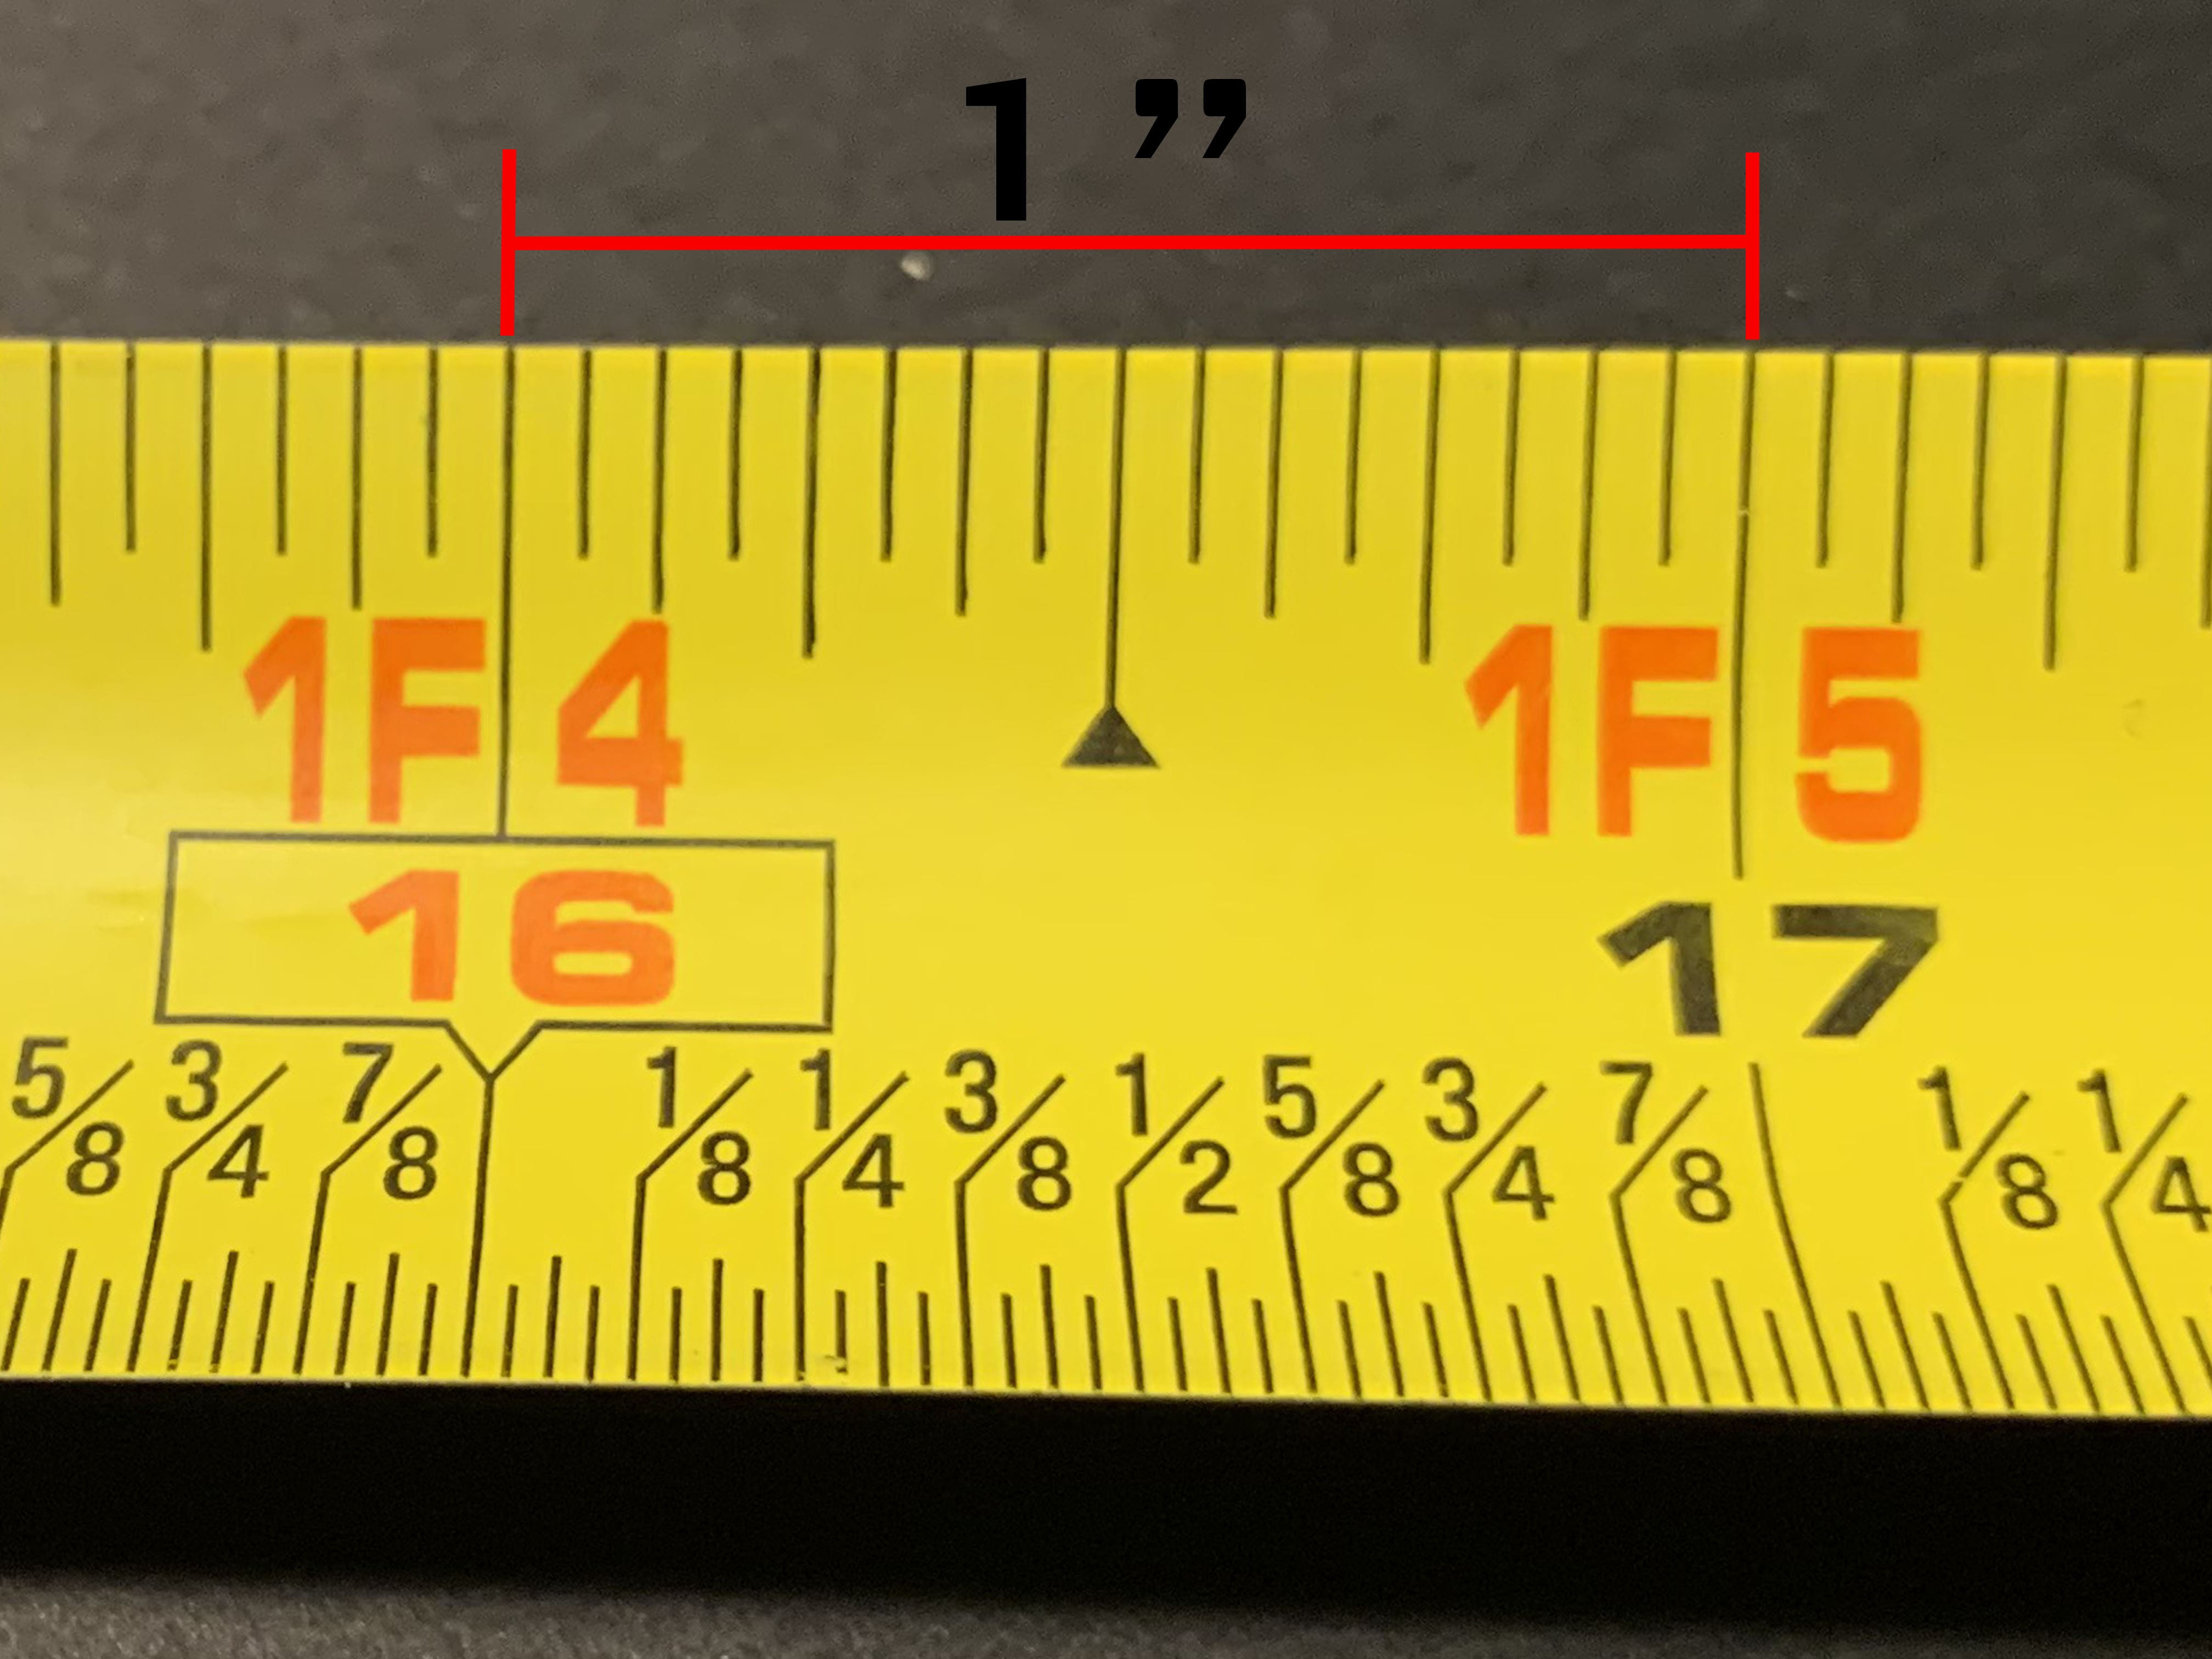 2.37 inches on a measurement tape